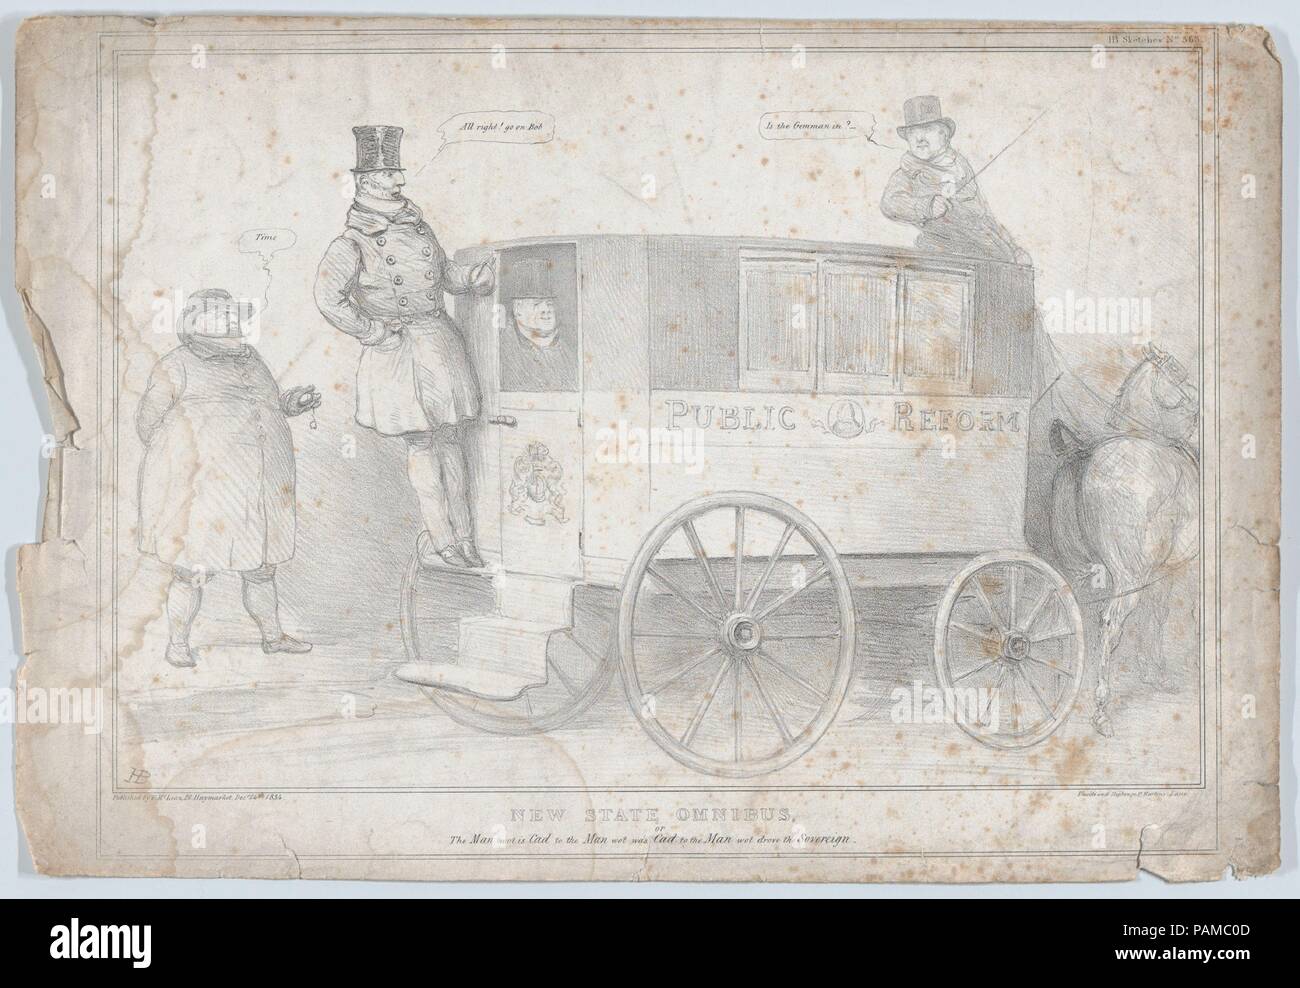 New State Omnibus, or, The Man wot is Cad to the Man wot was Cad to the Man wot drove the Sovereign. Artist: John Doyle (Irish, Dublin 1797-1868 London). Dimensions: Sheet: 11 3/4 × 17 5/16 in. (29.8 × 43.9 cm). Lithographer: Ducôte and Stephen (British, active 1830-40). Publisher: Thomas McLean (British, active London 1788-1885). Series/Portfolio: HB Sketches, No. 363. Subject: William IV, King of the United Kingdom of Great Britain and Ireland (British, 1765-1837); Arthur Wellesley, 1st Duke of Wellington (British, 1769-1852); Sir Robert Peel (British, Bury, 1788-1850). Date: December 24, 18 Stock Photo